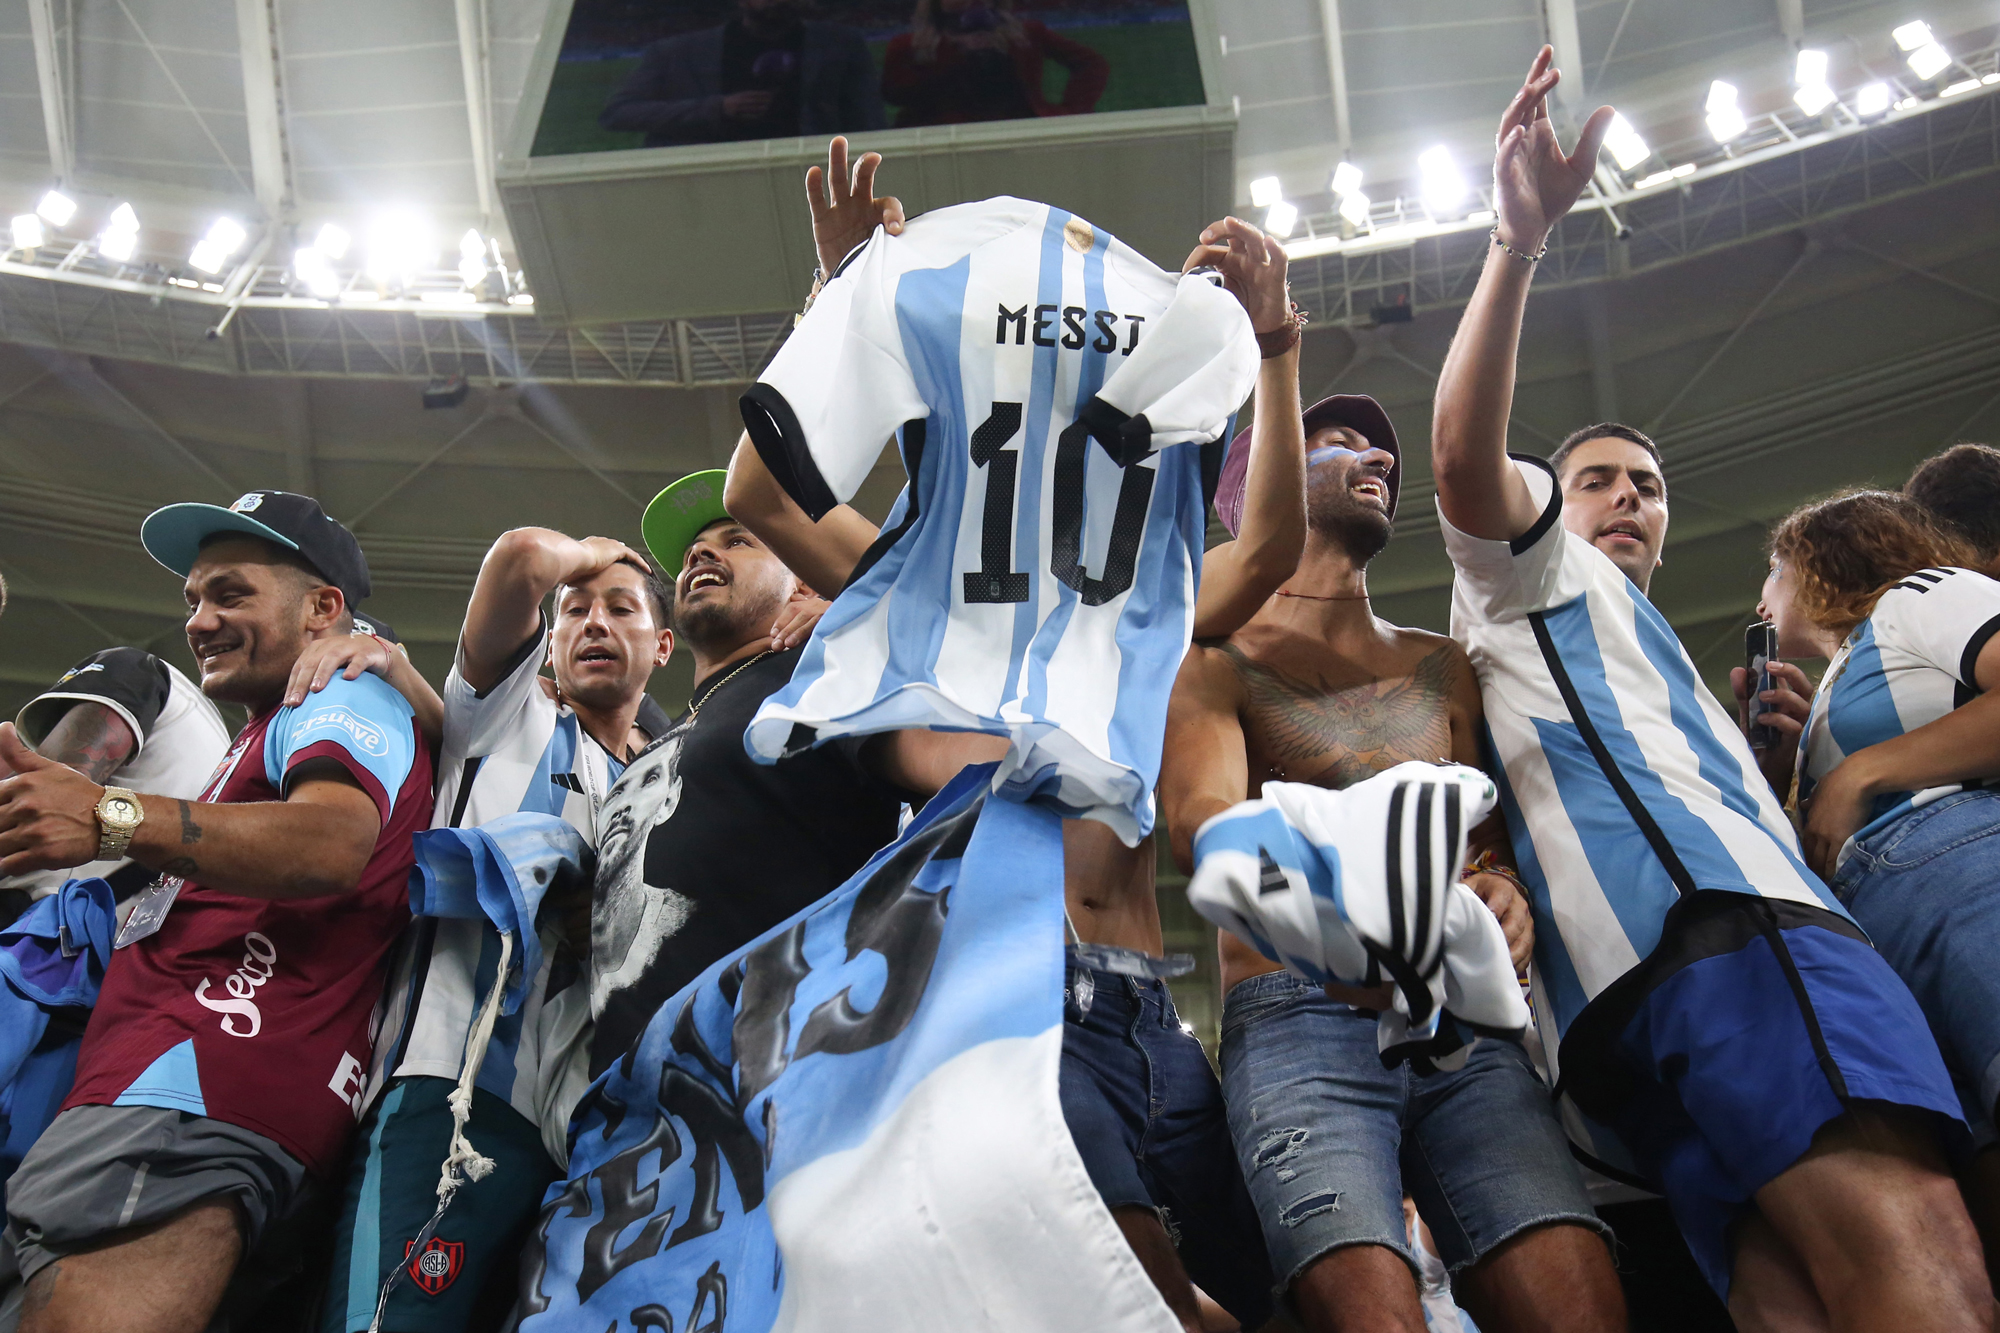 Argentina fans with a Lionel Messi shirt during the match between Argentina and Australia at Ahmad bin Ali Stadium in Al Rayyan, Qatar on Saturday.